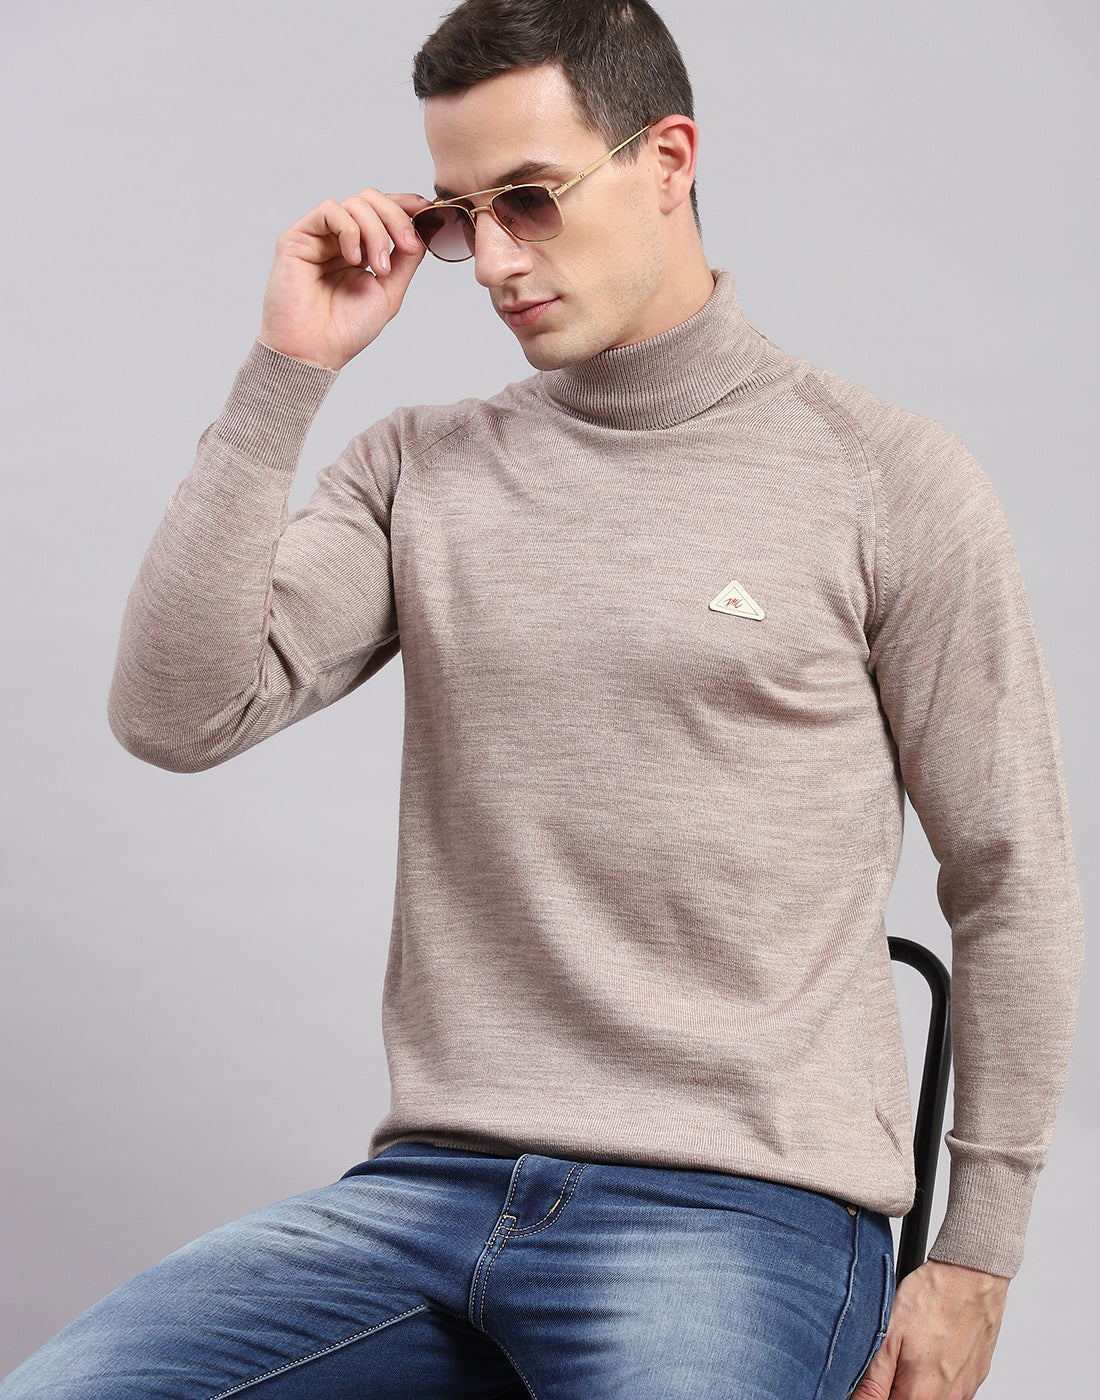 Men Beige Solid H Neck Full Sleeve Sweaters/Pullovers